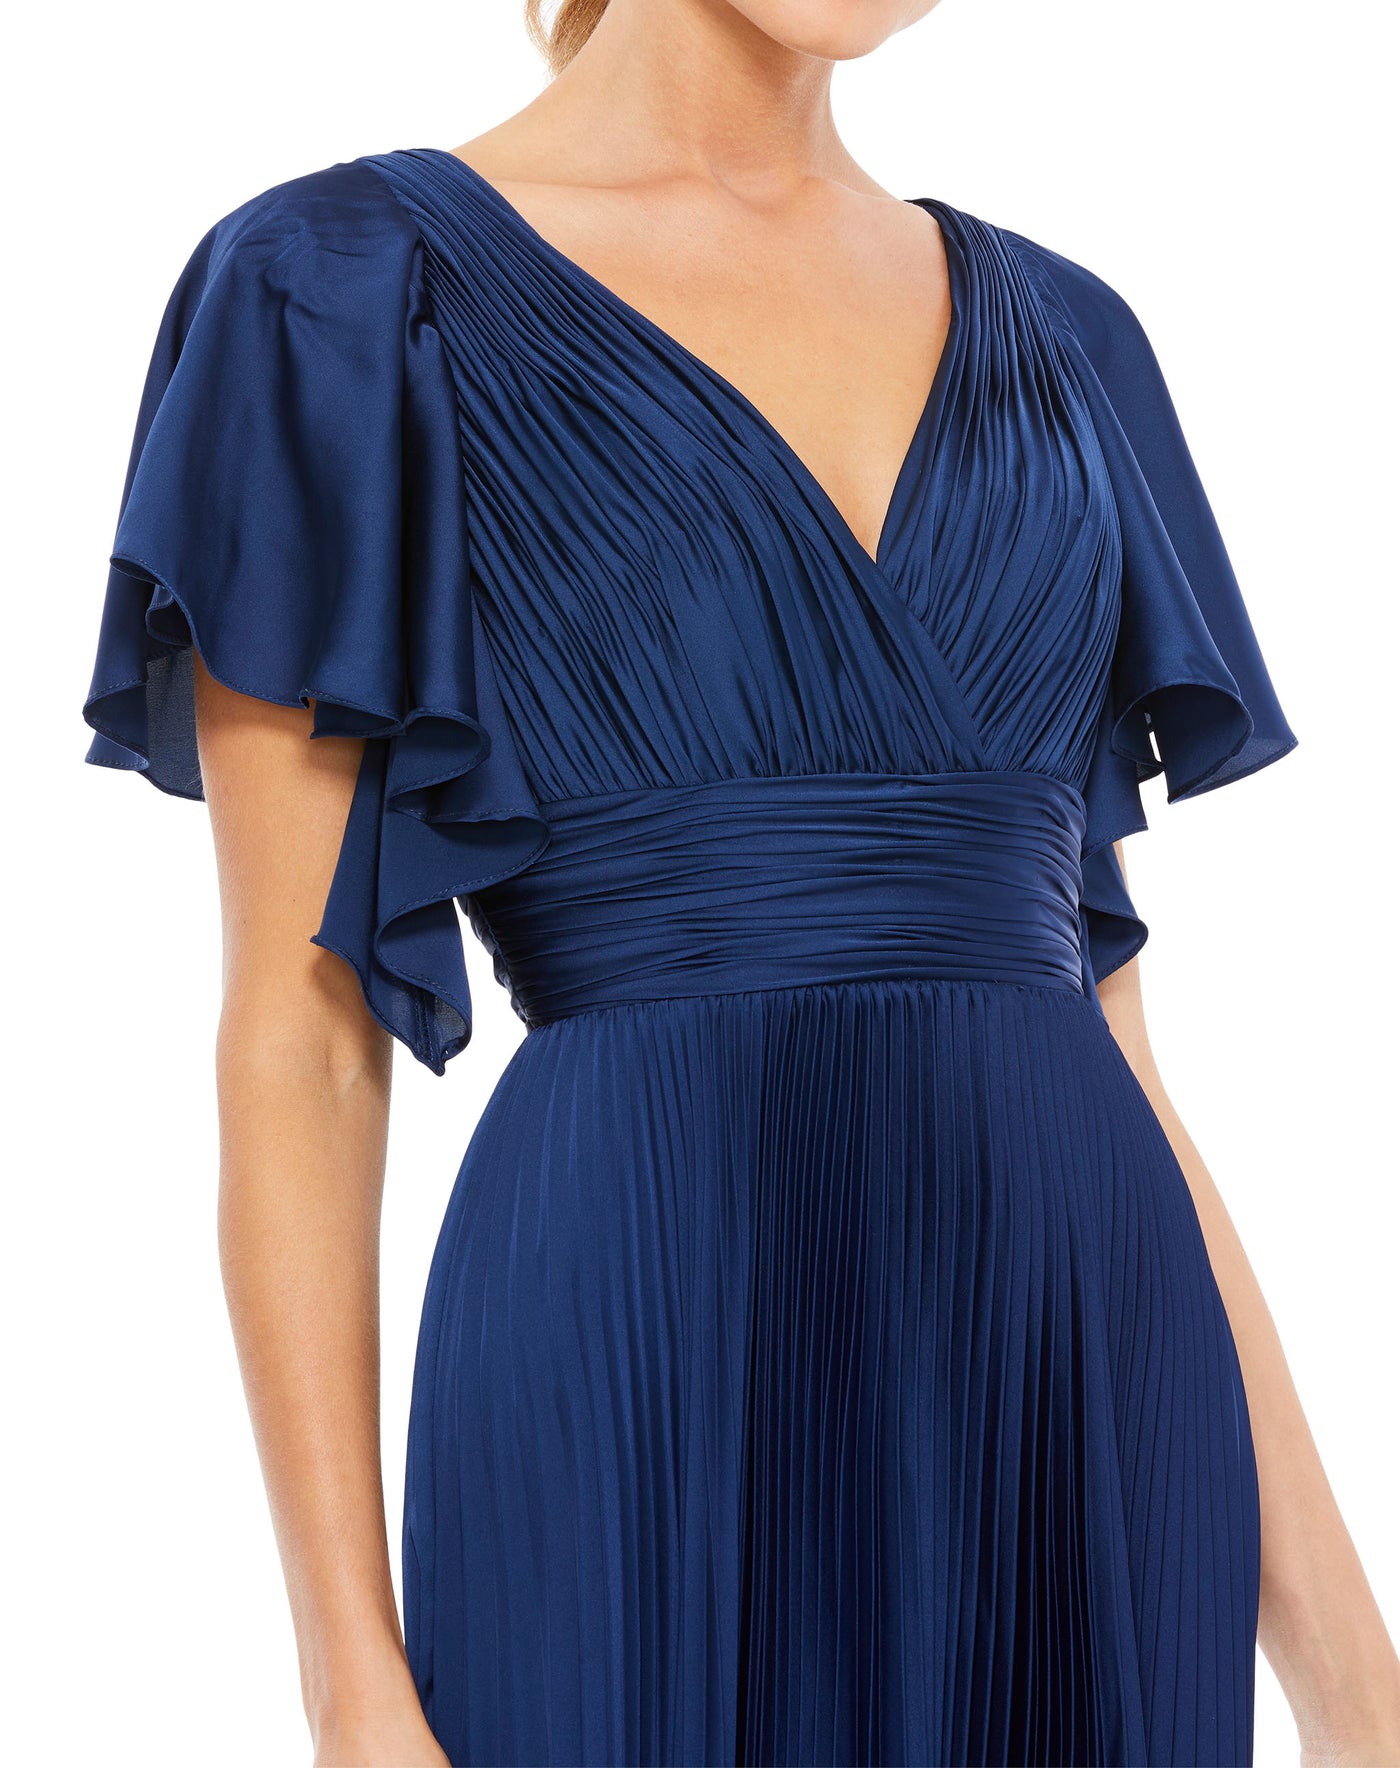 Pleated A-Line Flowing Sleeve Gown